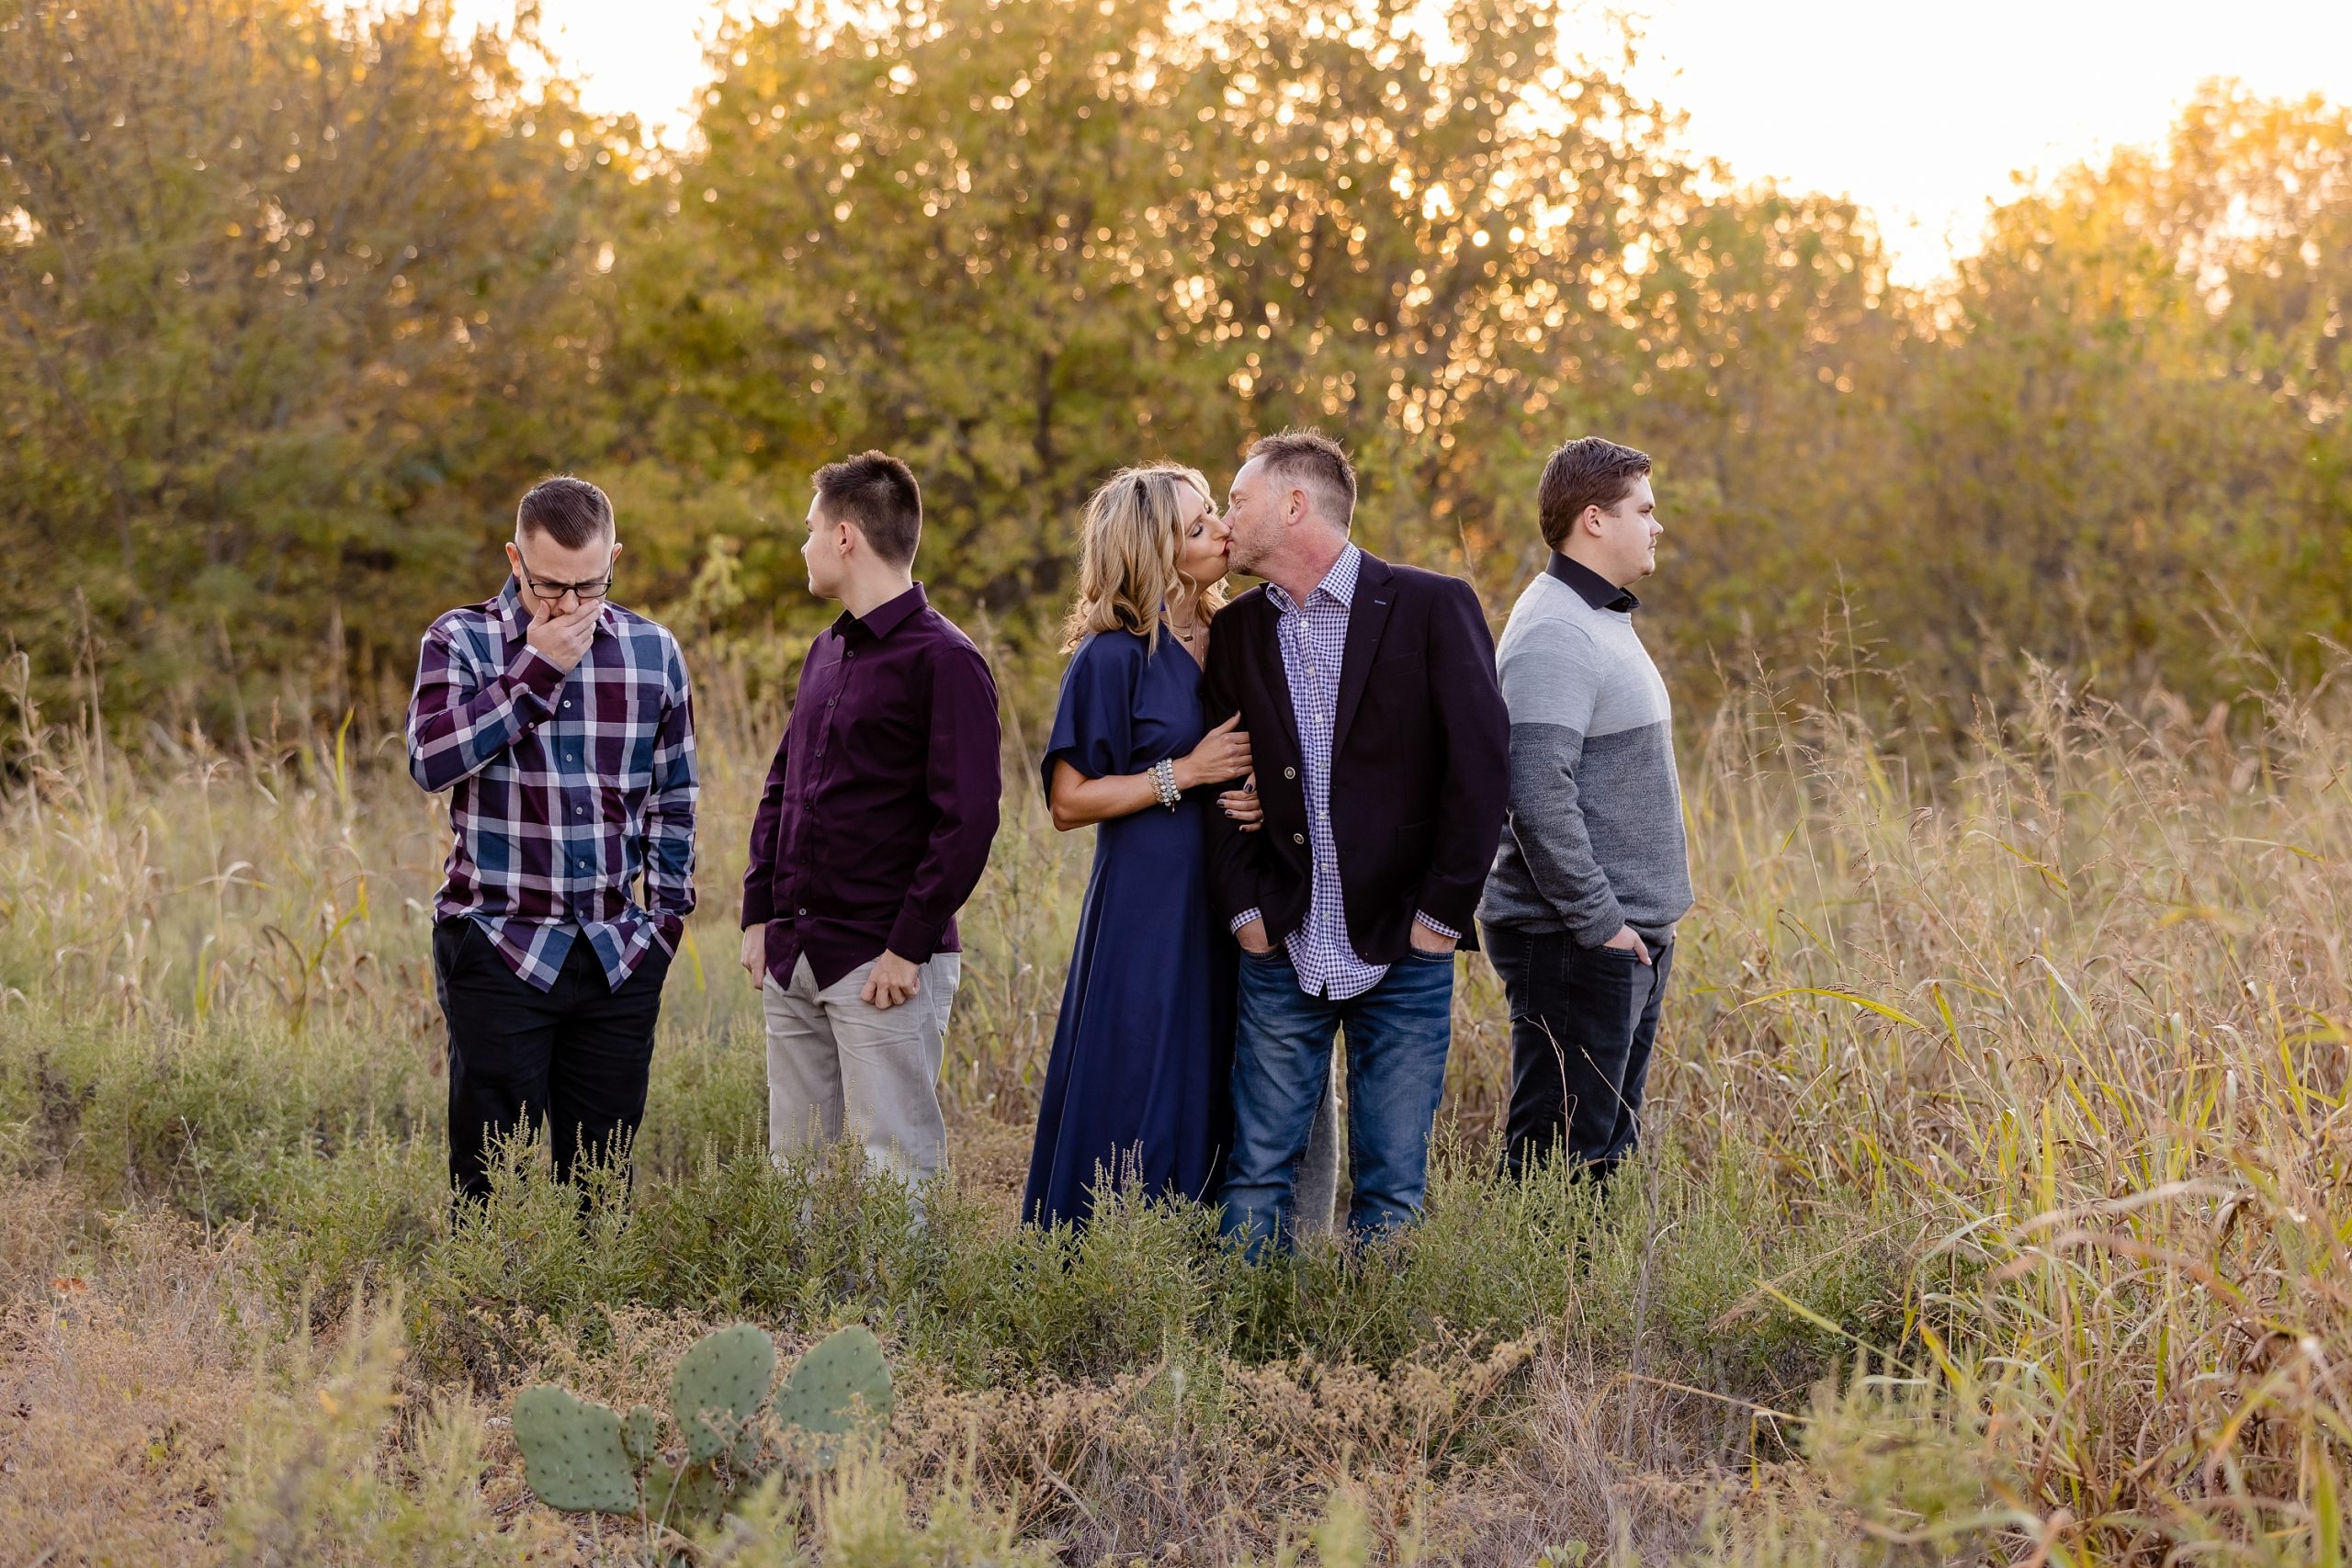 jessica rambo photography, family photography, family photographer, fort worth portrait photographer, fort worth portrait photography, fort worth family photographer, fort worth family photography, family photographer in fort worth, fort worth photo session, fort worth photo locations